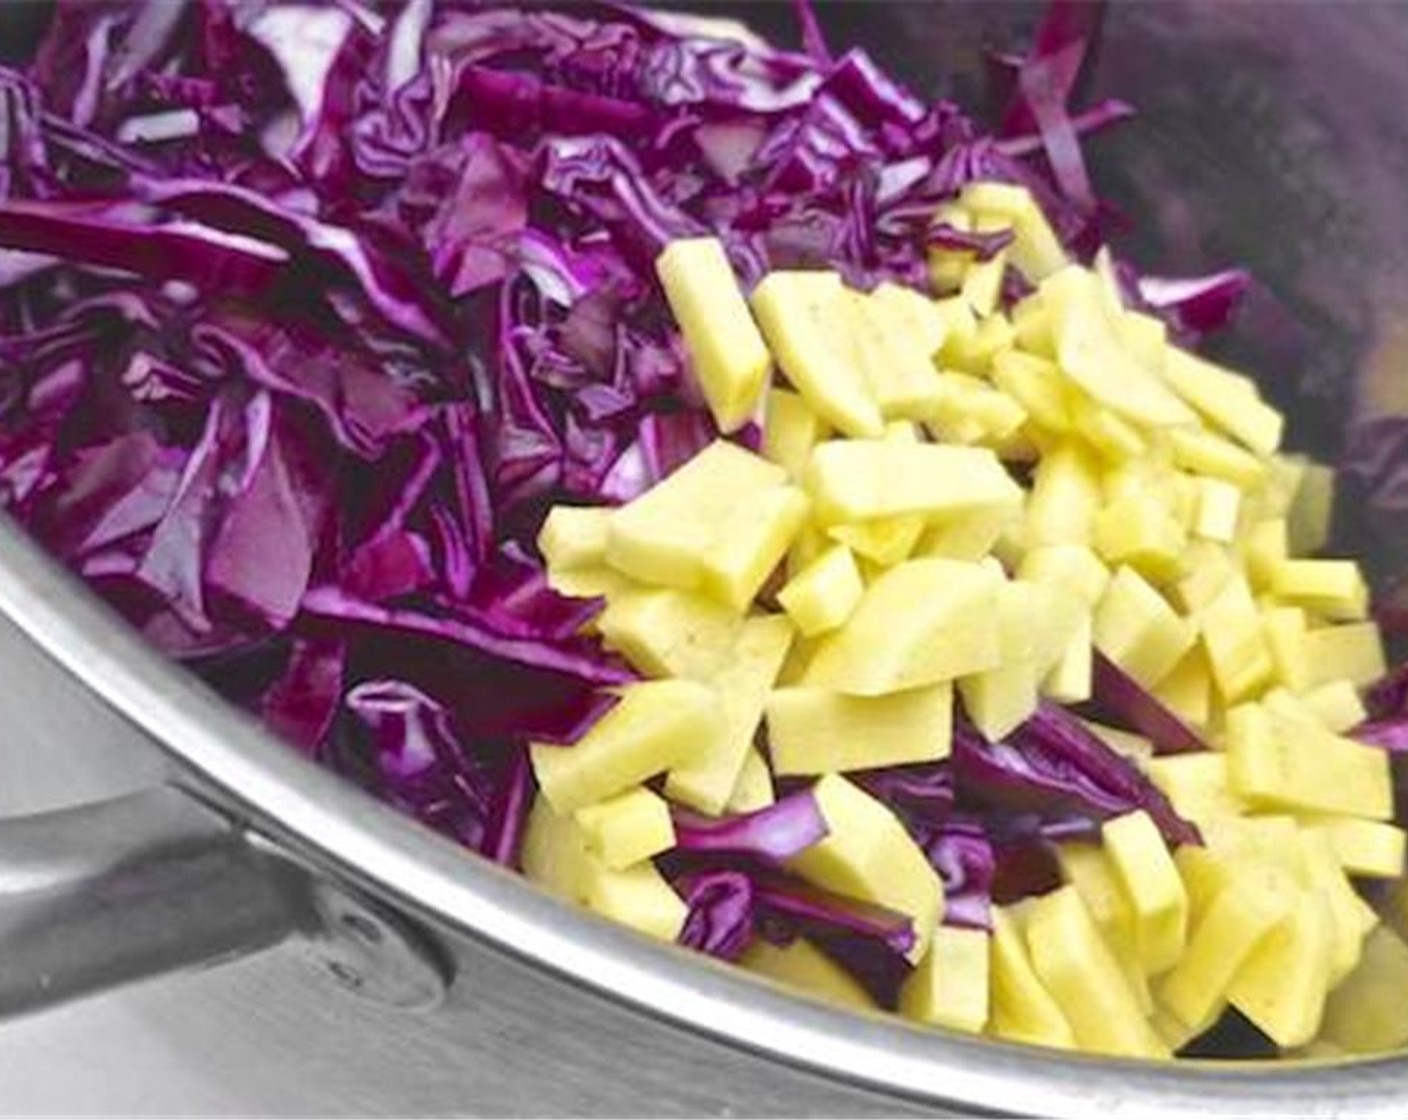 step 3 Add the chopped red cabbage and potato to the soft onion in the pan. Season generously with Ground Black Pepper (to taste) and Salt (to taste). Stir the vegetables well. Put a lid on the pan and cook for 5 minutes. Stir regularly.